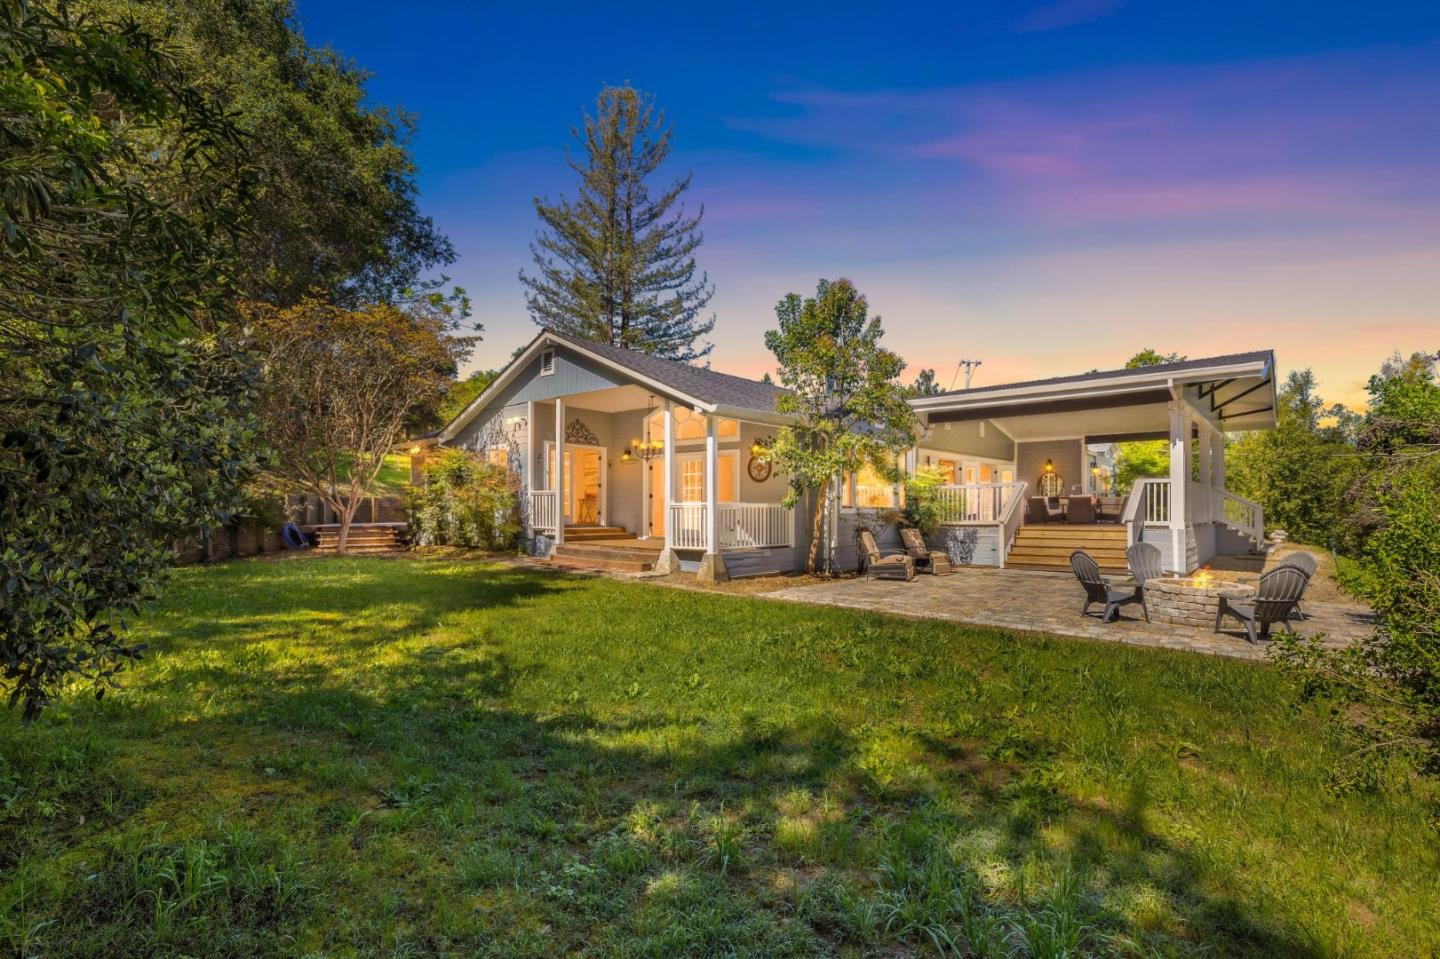 Photo of 3231 Browns Valley Rd in Napa, CA